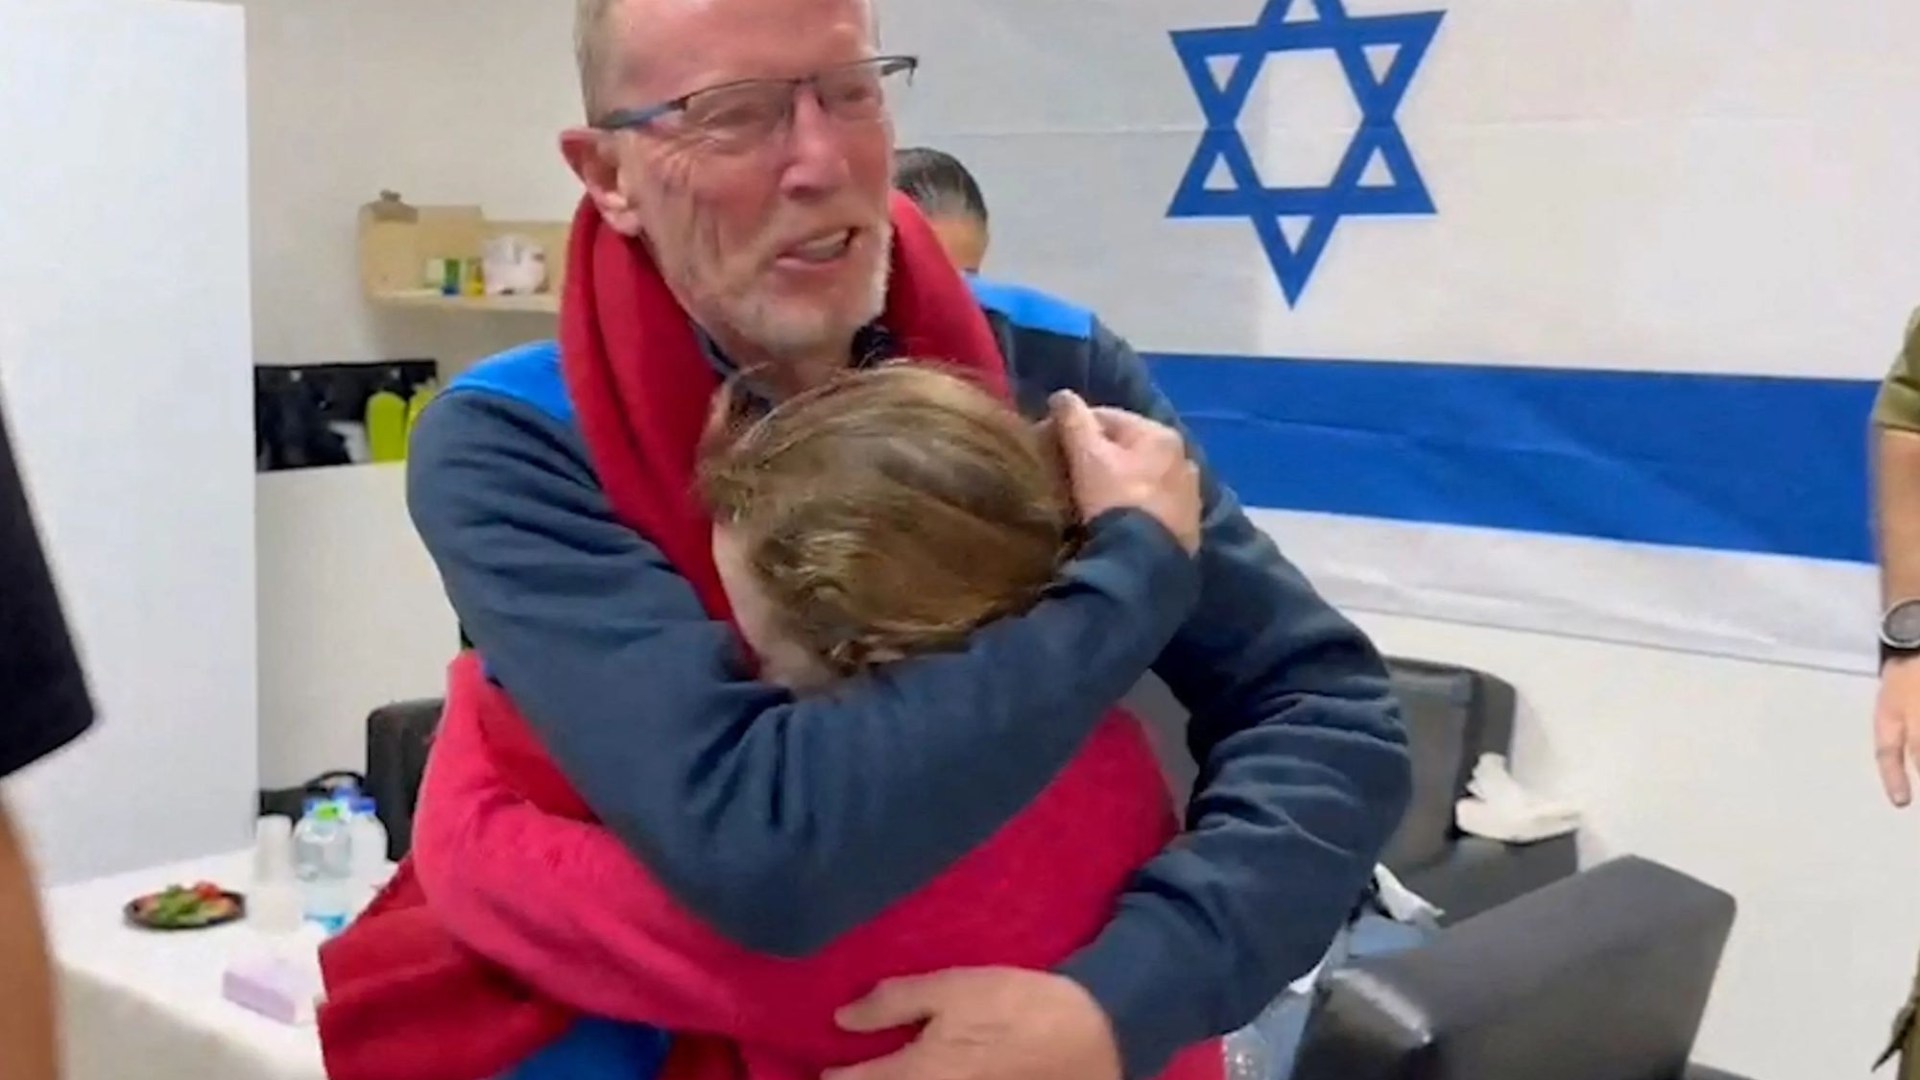 Emily Hand, 9, overcomes Hamas ordeal – Dad reveals she’s ‘got her voice back’